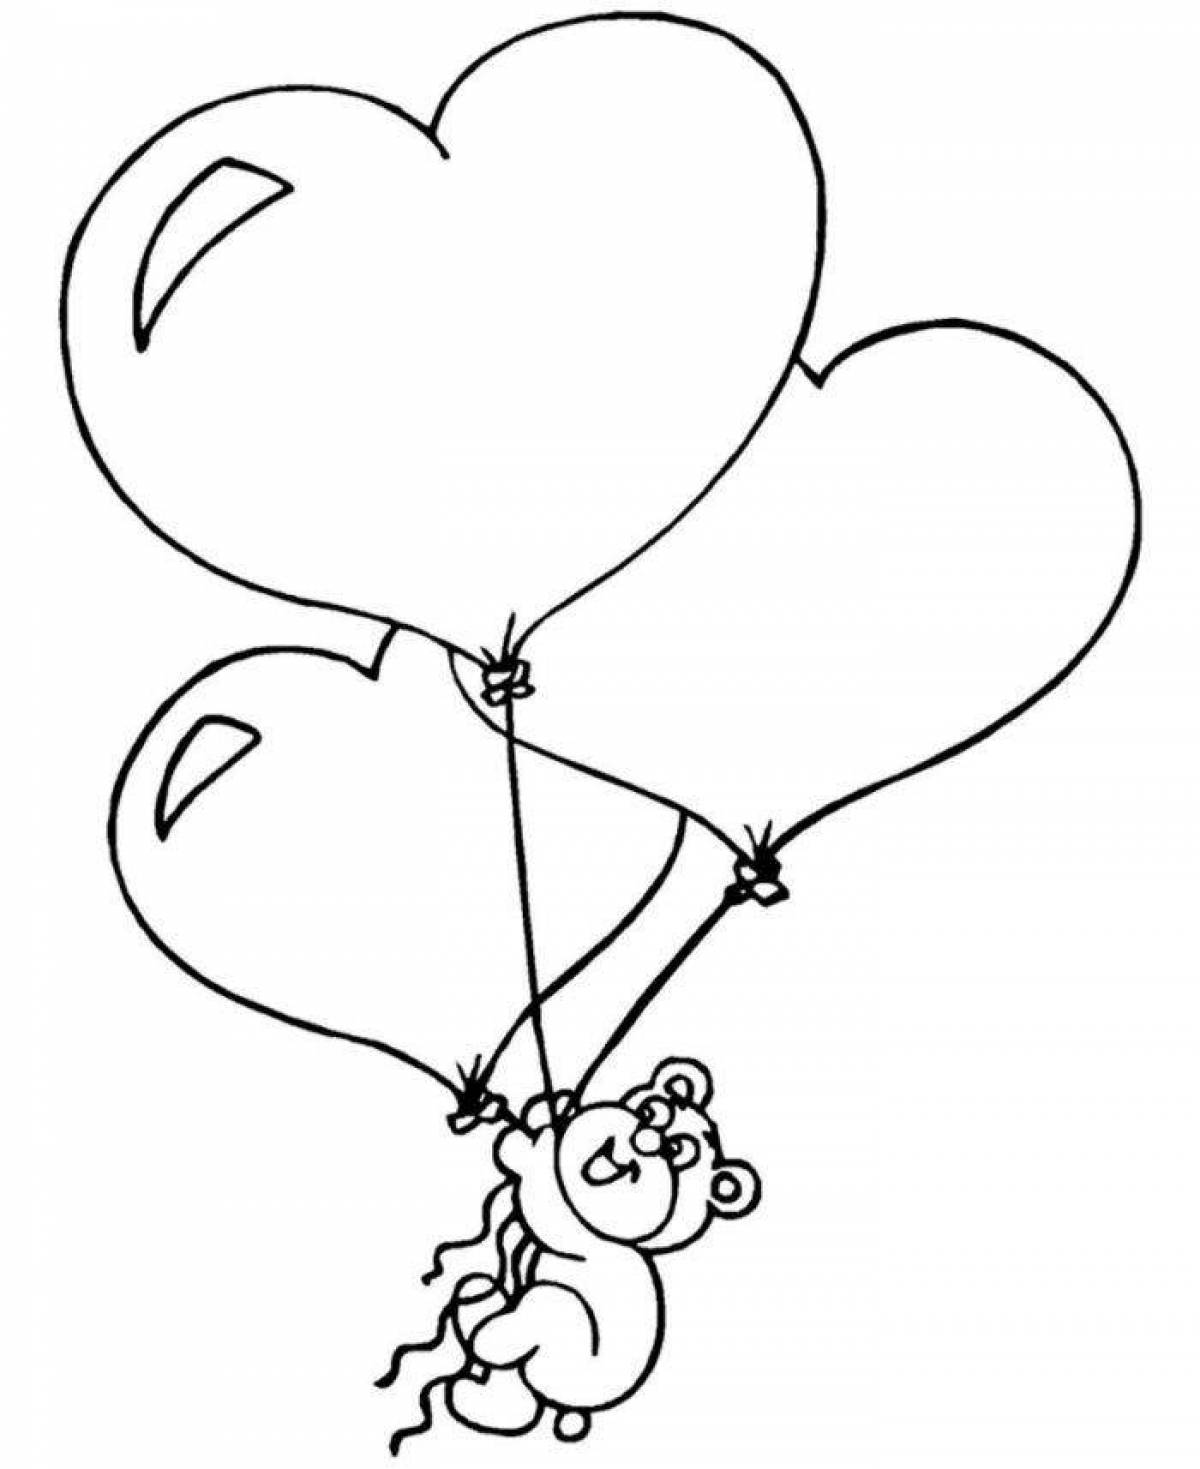 Cute valentines day coloring page